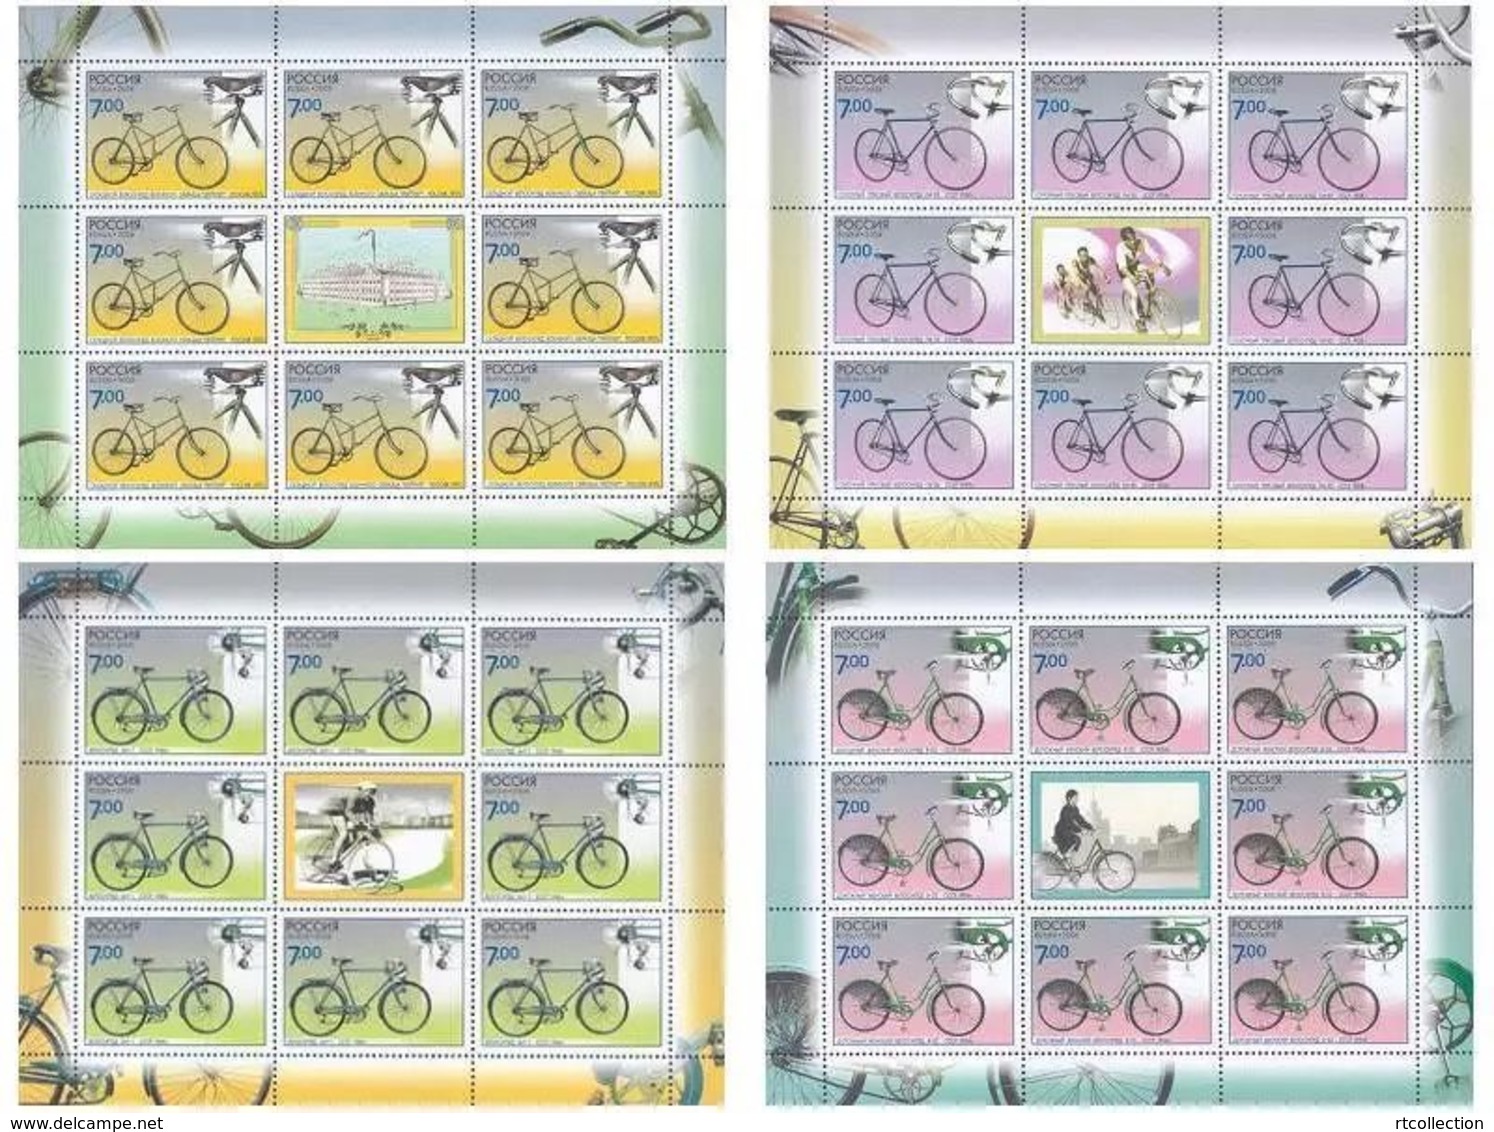 Russia 2008 Sheet History Of Sciences Technique Bicycles Transport Bike Cycling Race Bicycle Stamps MNH Michel 1518-1521 - Feuilles Complètes